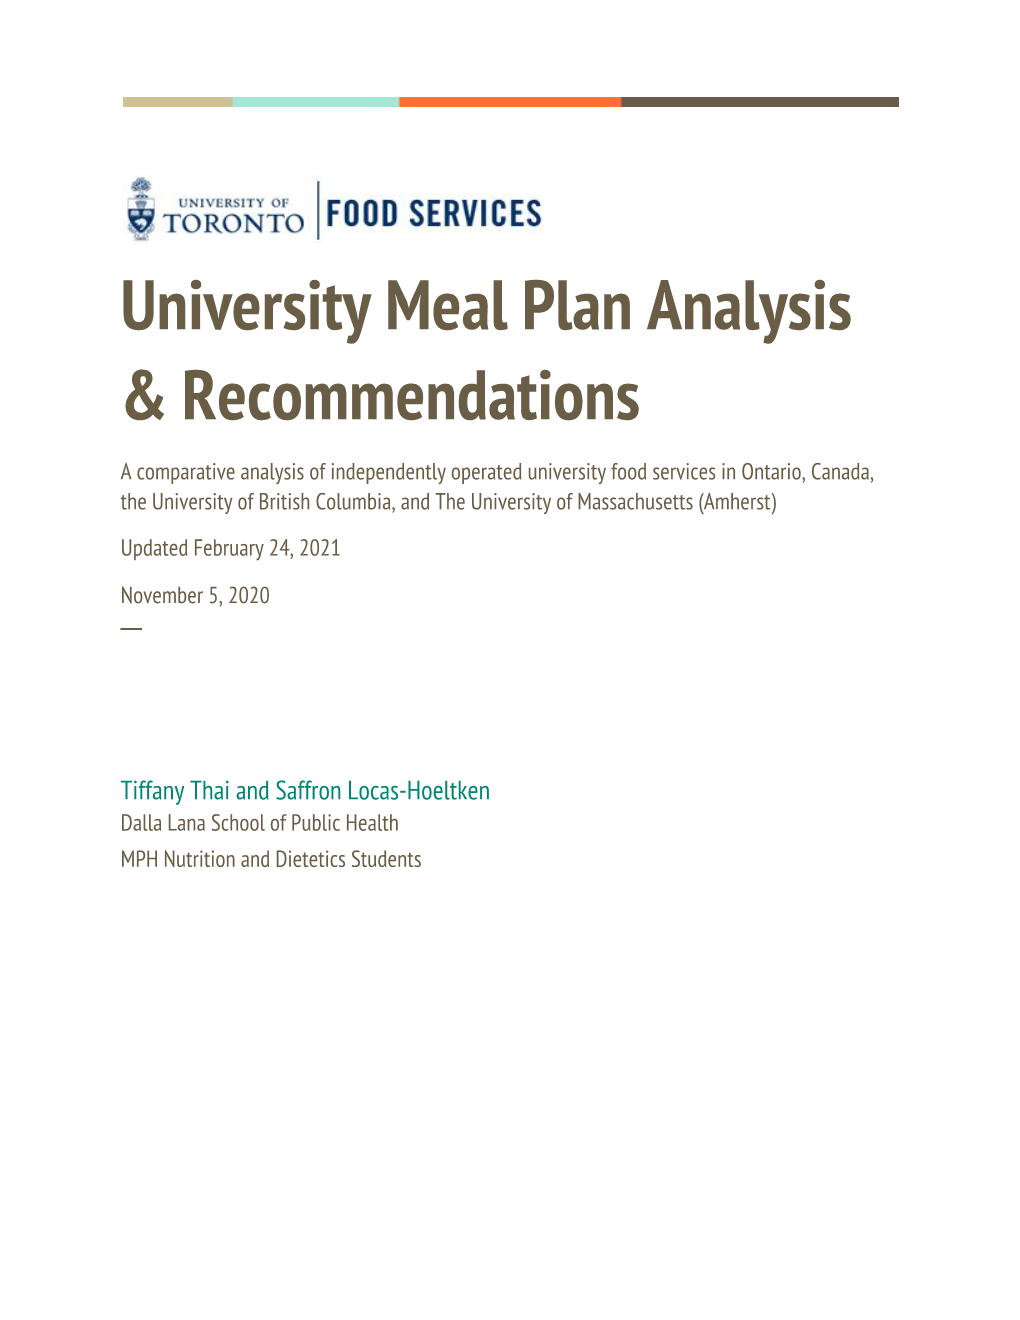 University Meal Plan Analysis & Recommendations